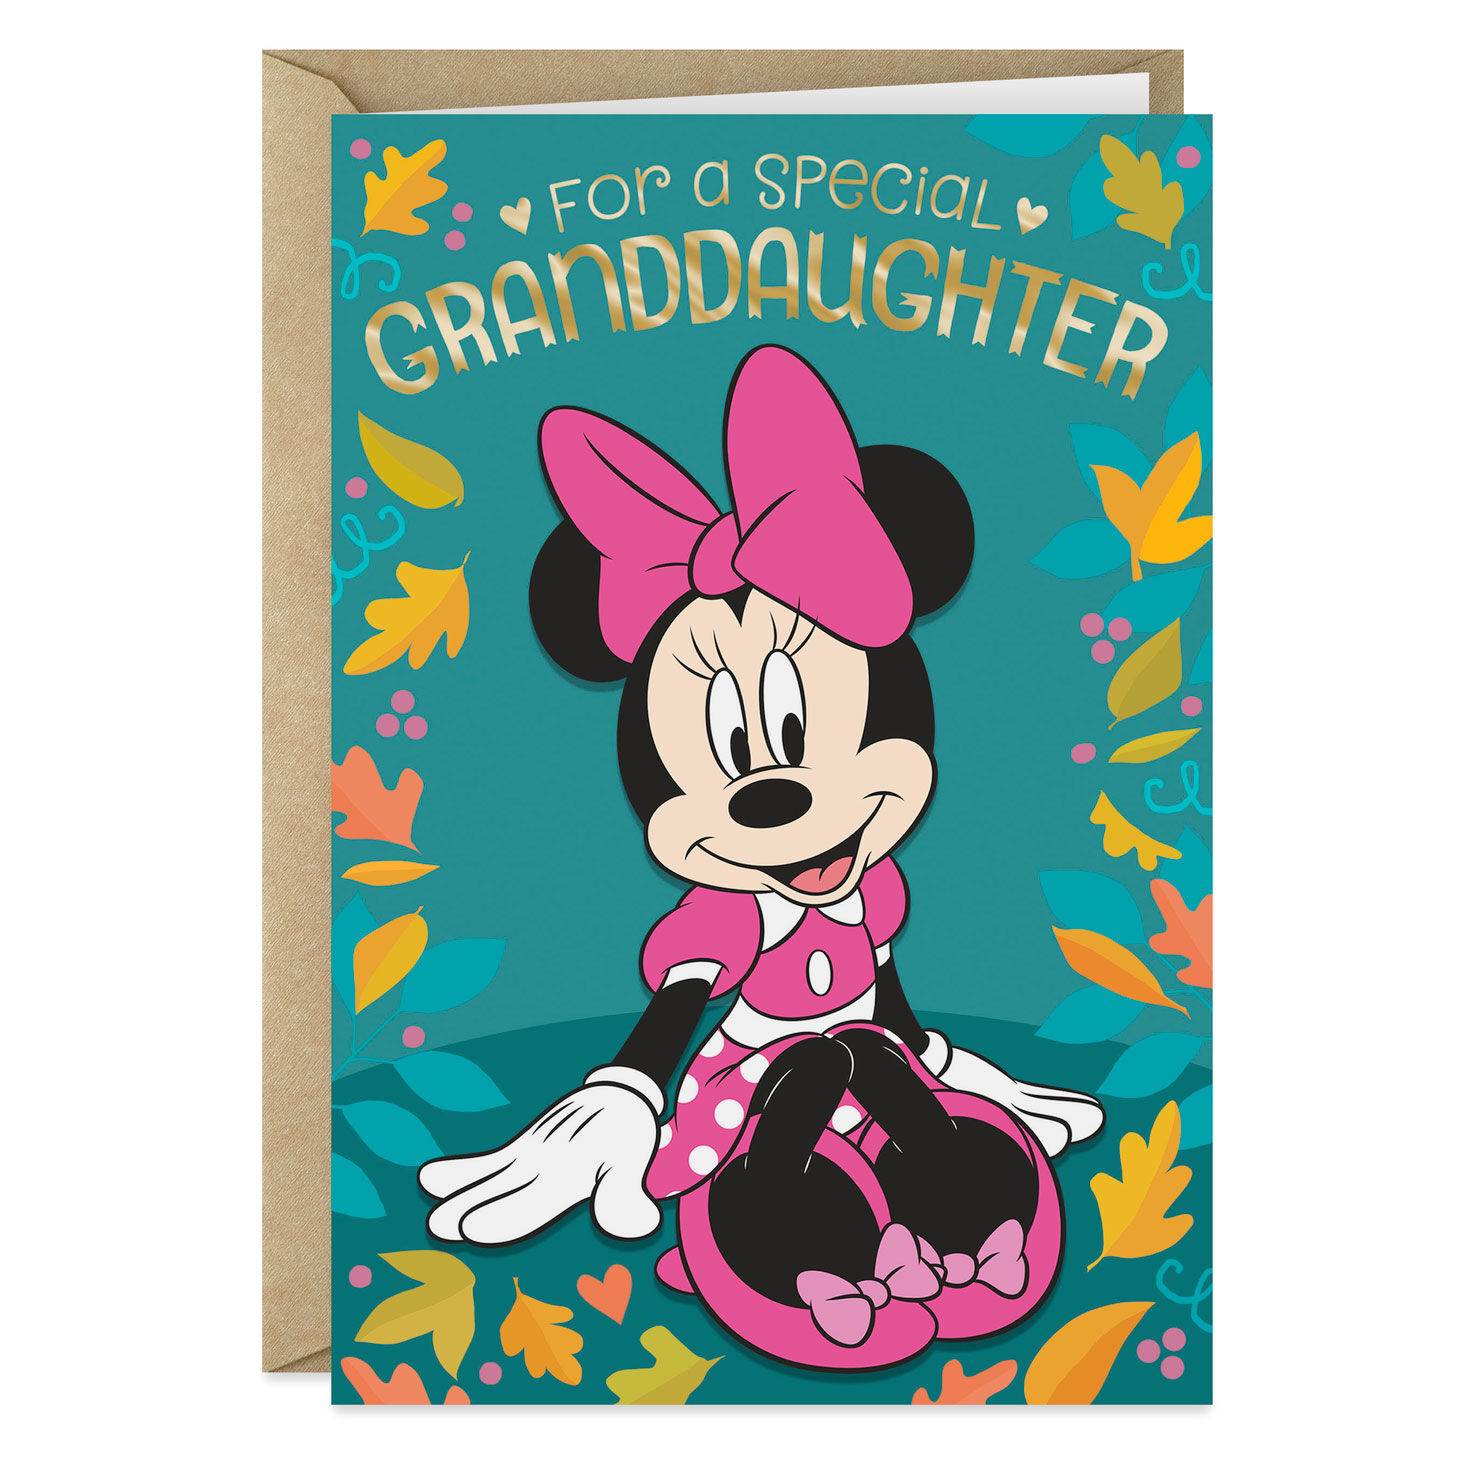 Details about   Hallmark Mickey Mouse Minnie Christmas Card  GrandDaughter and Husband NEW 